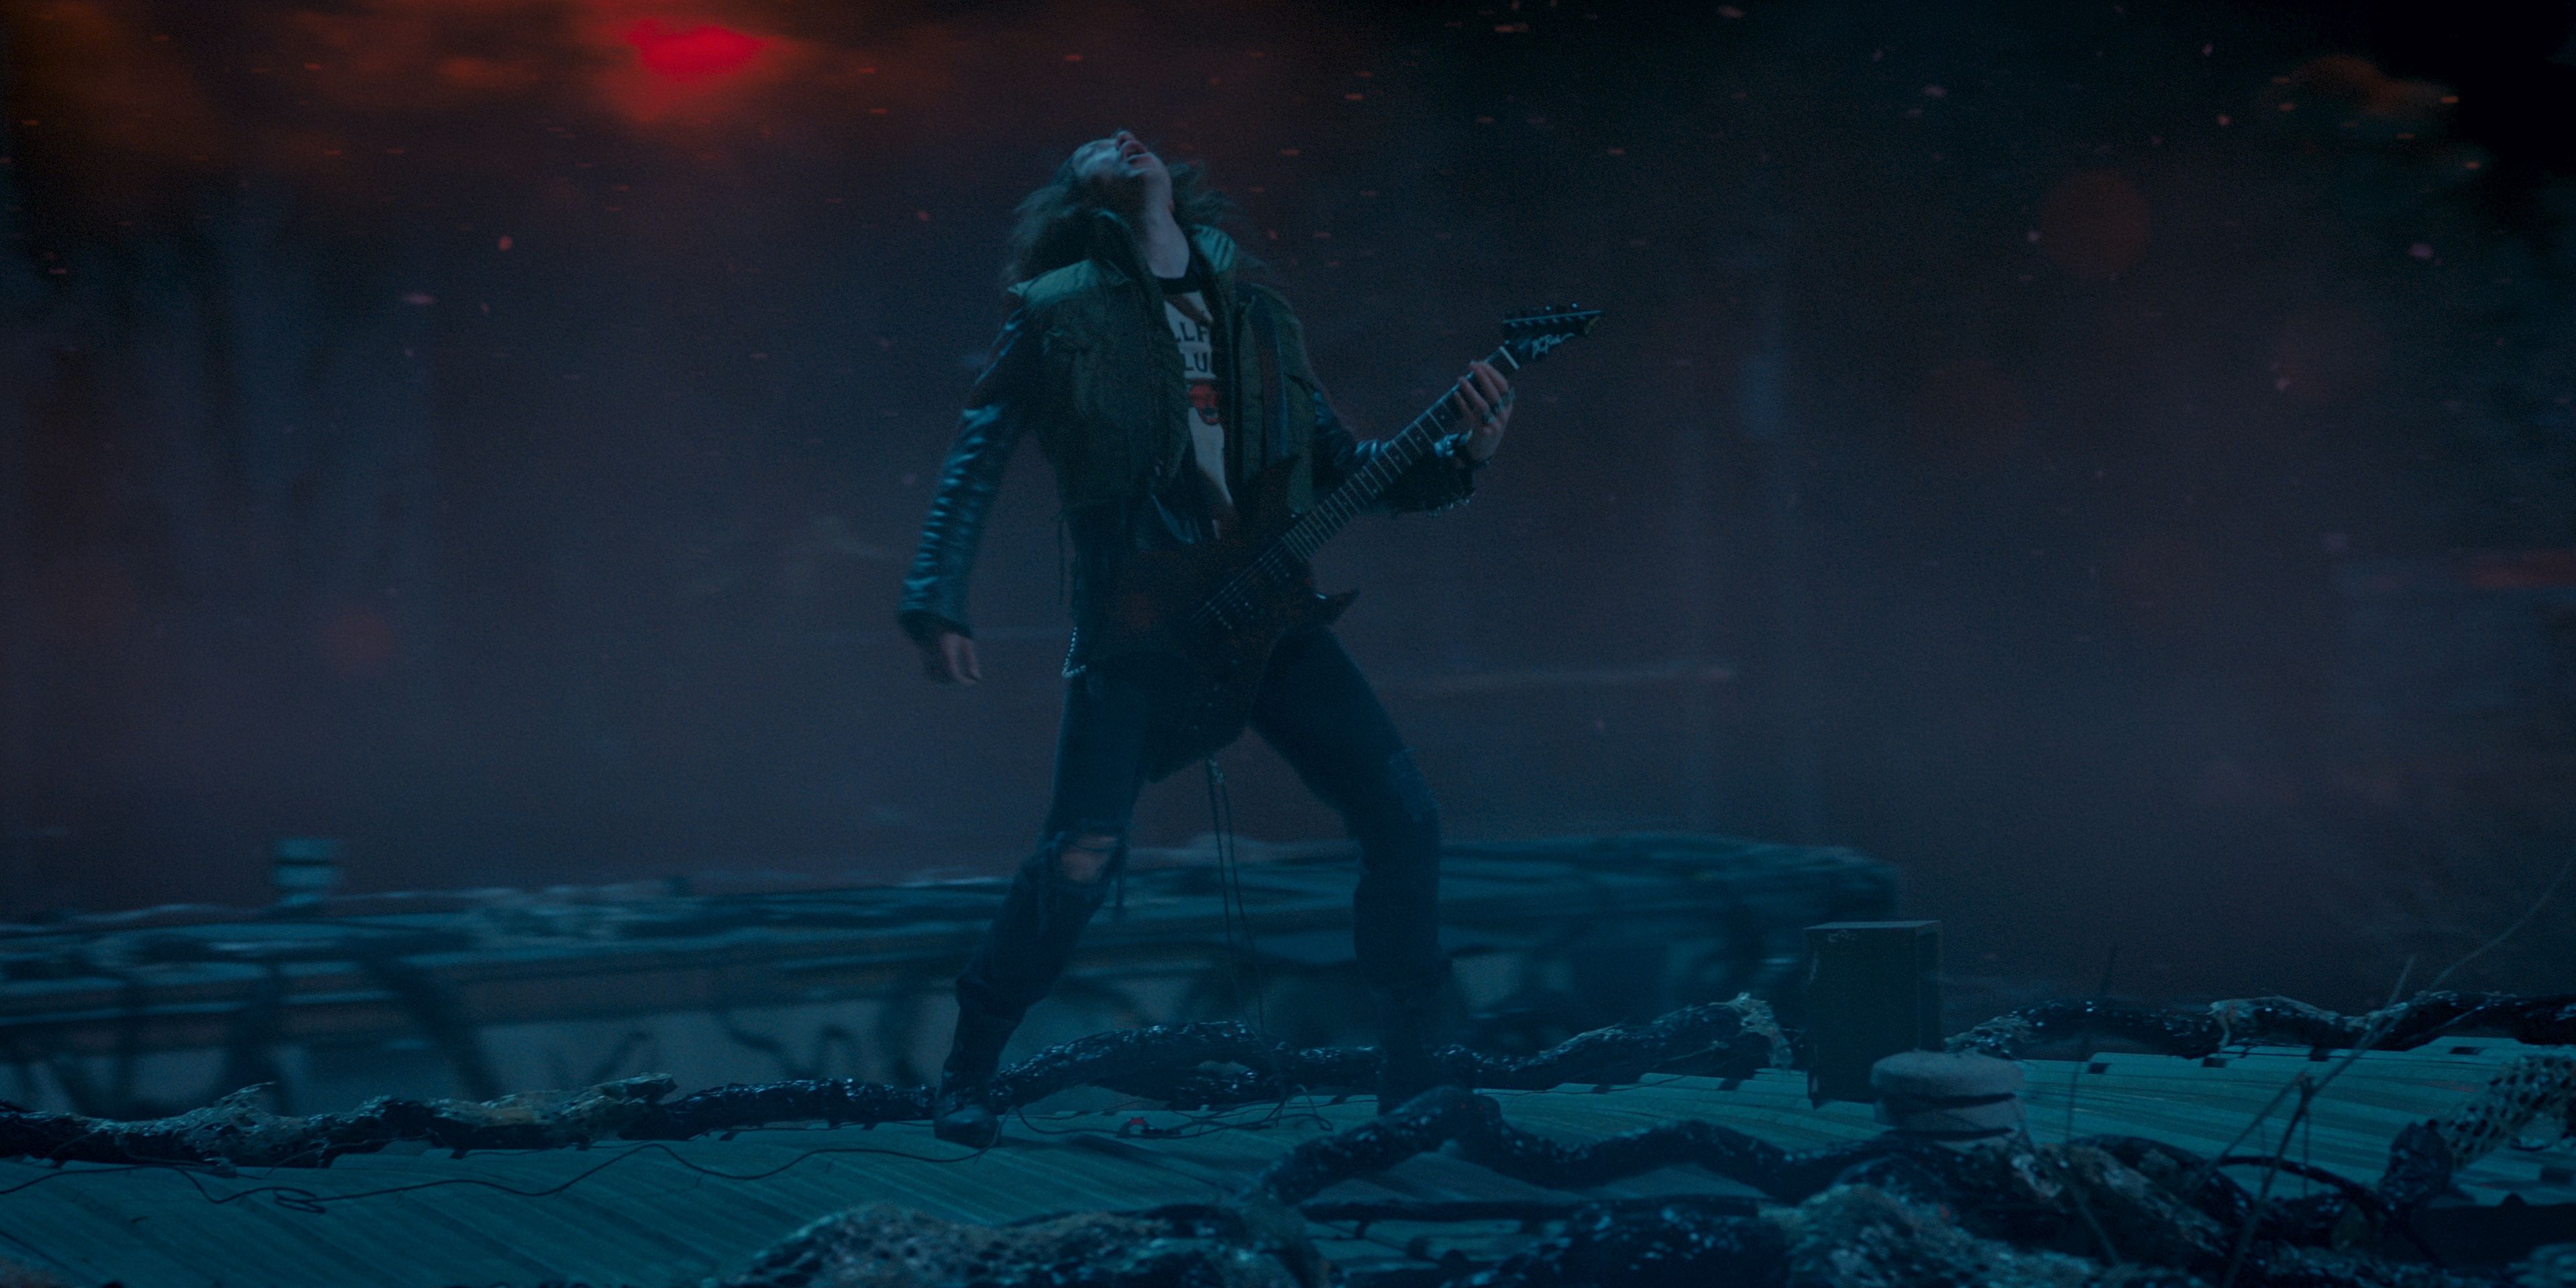 Which Metallica Guitar Solo Does Eddie Absolutely Shred In Stranger Things  4 Vol. 2?